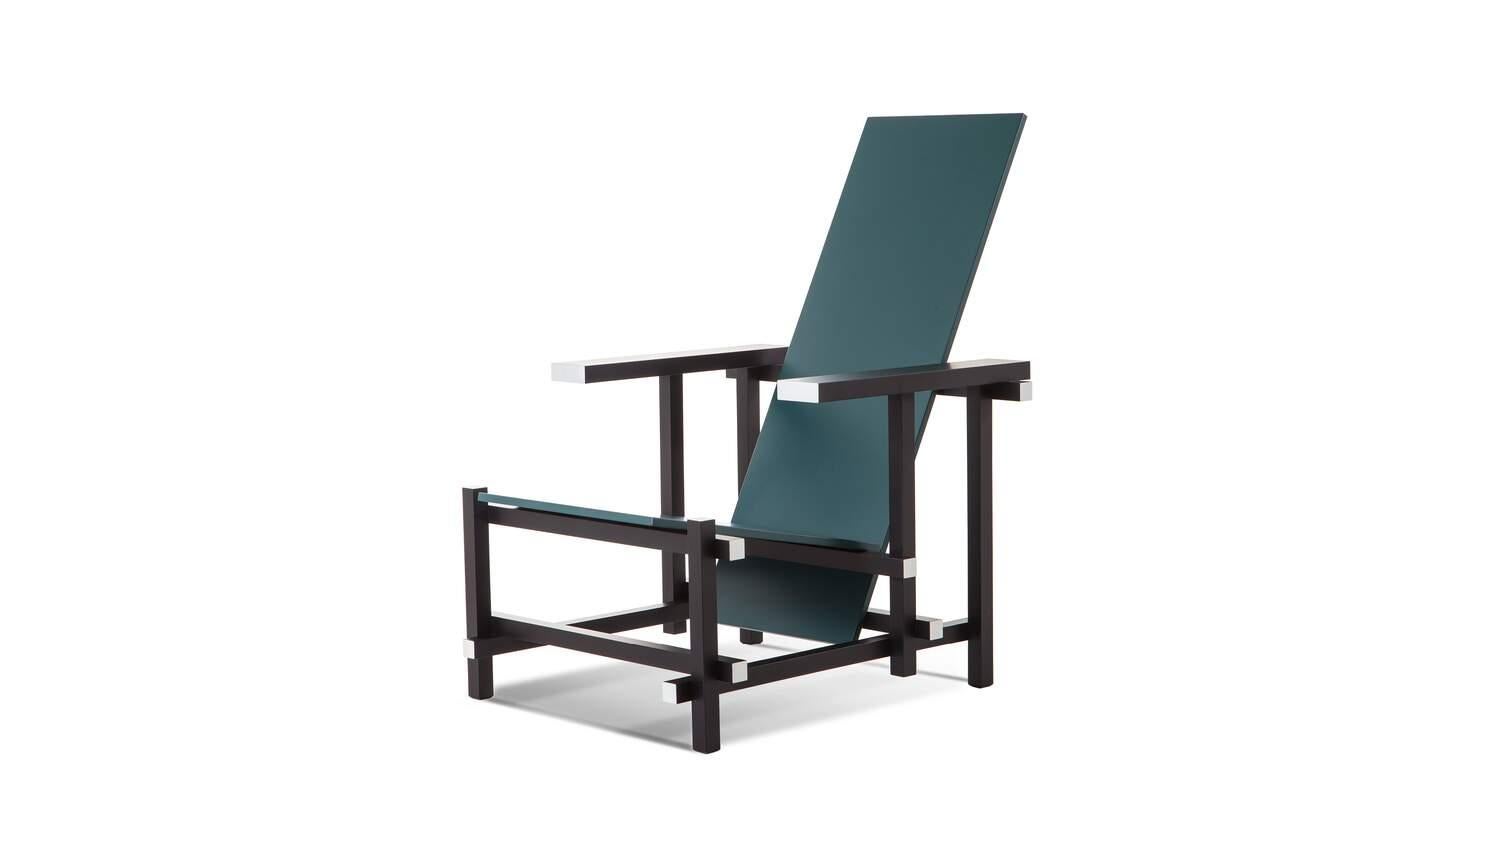 Chair designed by Gerrit Rietveld in 1920. Relaunched in 2015.
Manufactured by Cassina in Italy.

One of the versions of the iconic model dated 1918. The structure is in black-stained beechwood with white contrasting parts. Seat and back in green